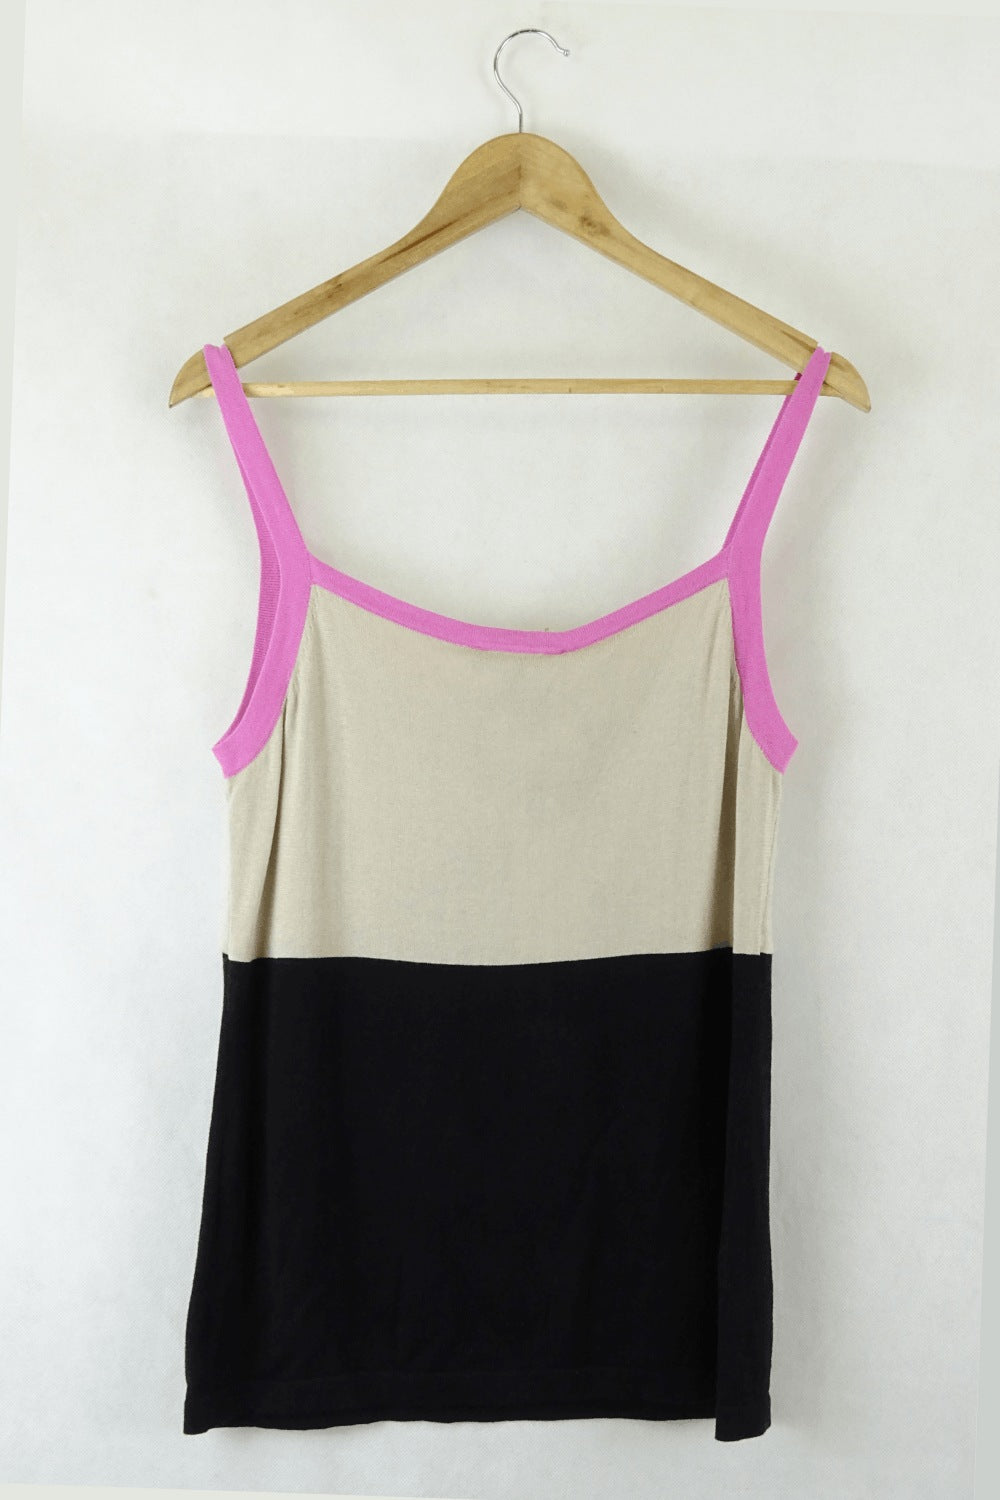 Marie Mero Knitted Beige and Pink Singlet 12